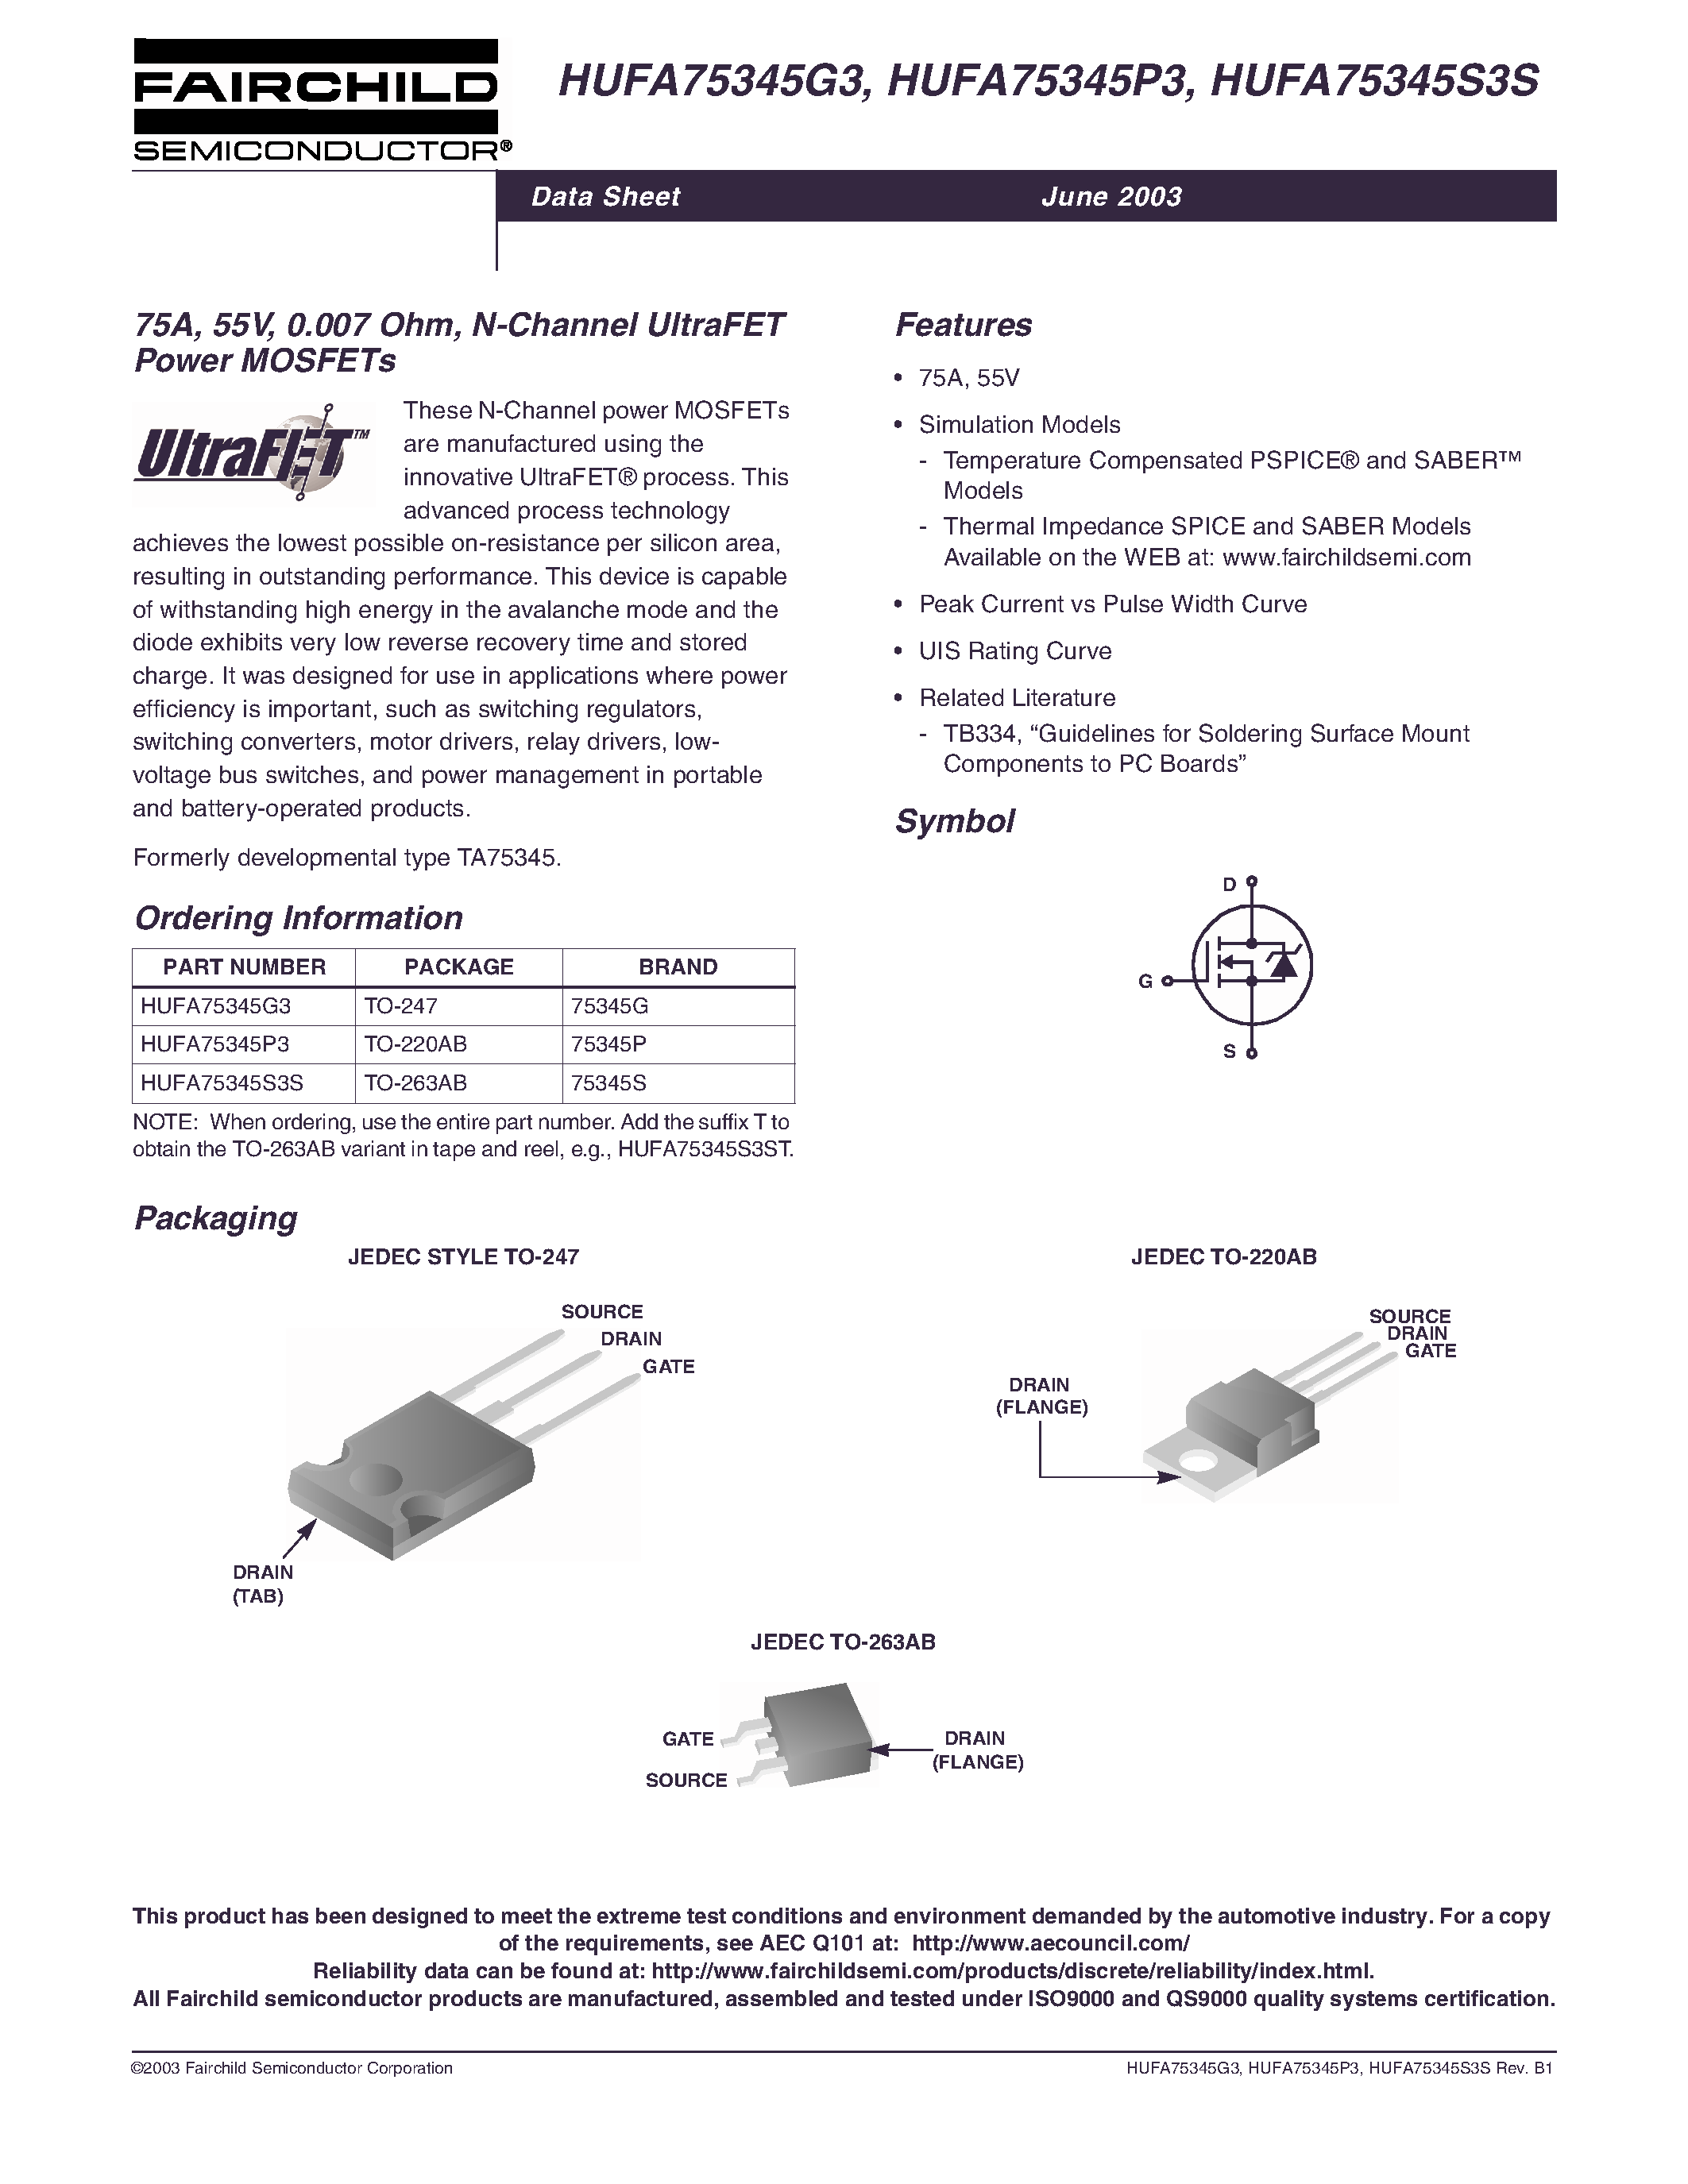 Datasheet HUFA75345G3 - 75A/ 55V/ 0.007 Ohm/ N-Channel UltraFET Power MOSFETs page 1